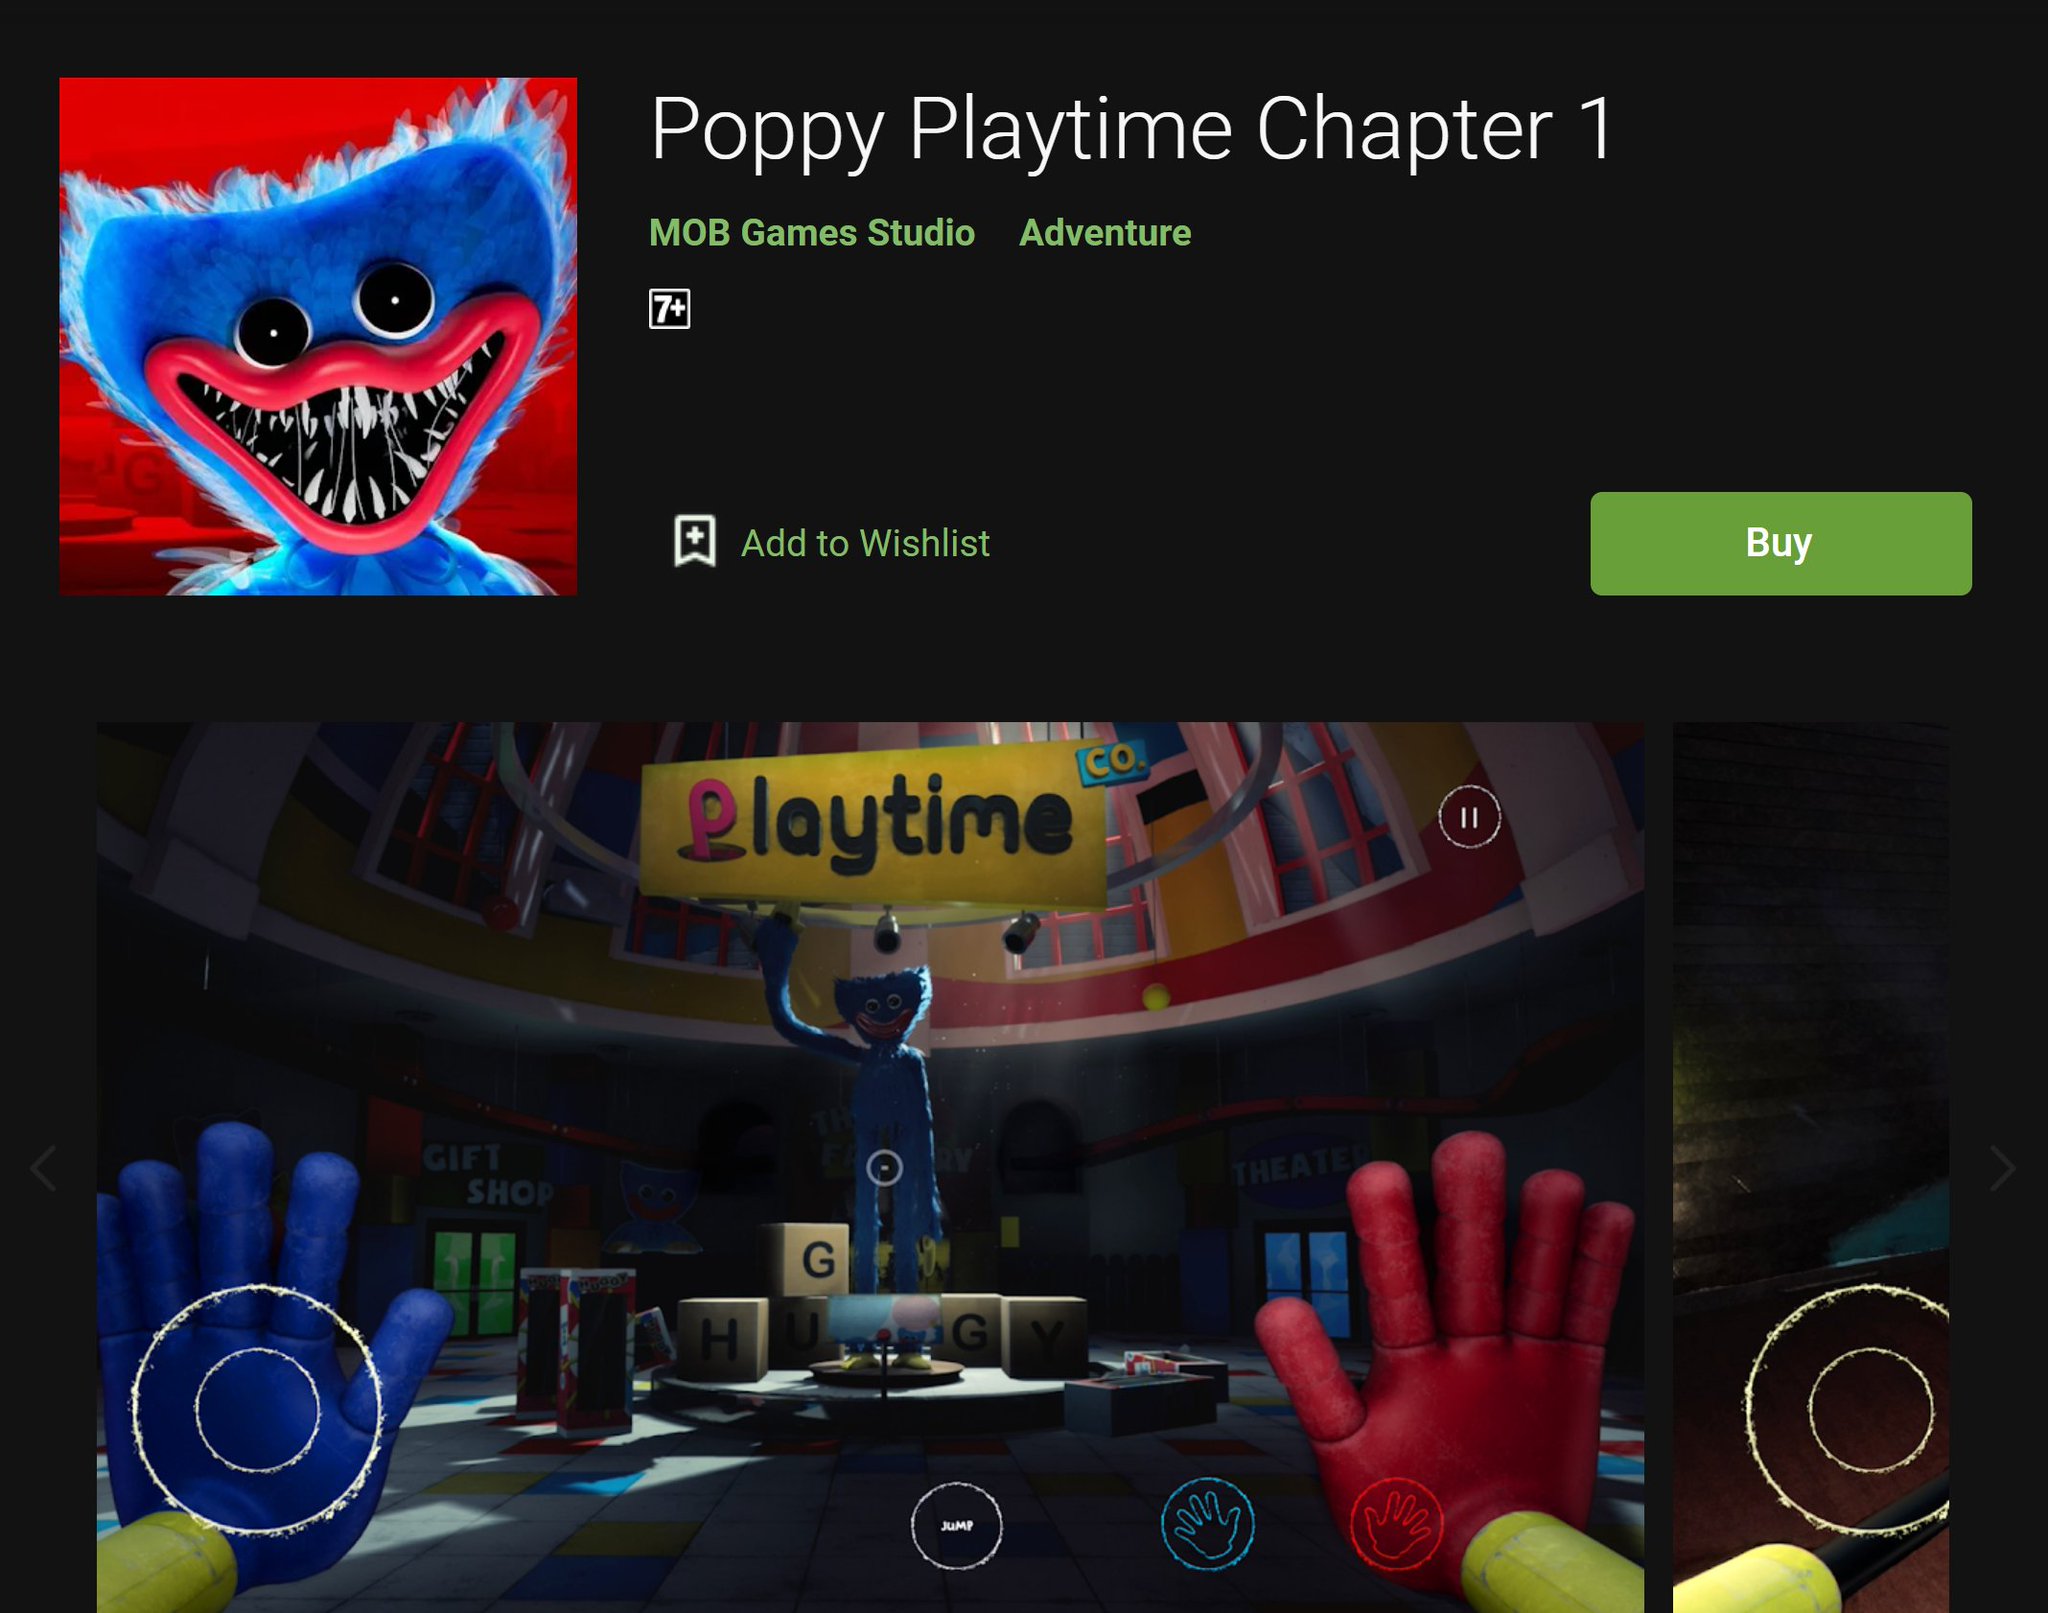 Poppy Playtime Chapter 1 is out now on mobile